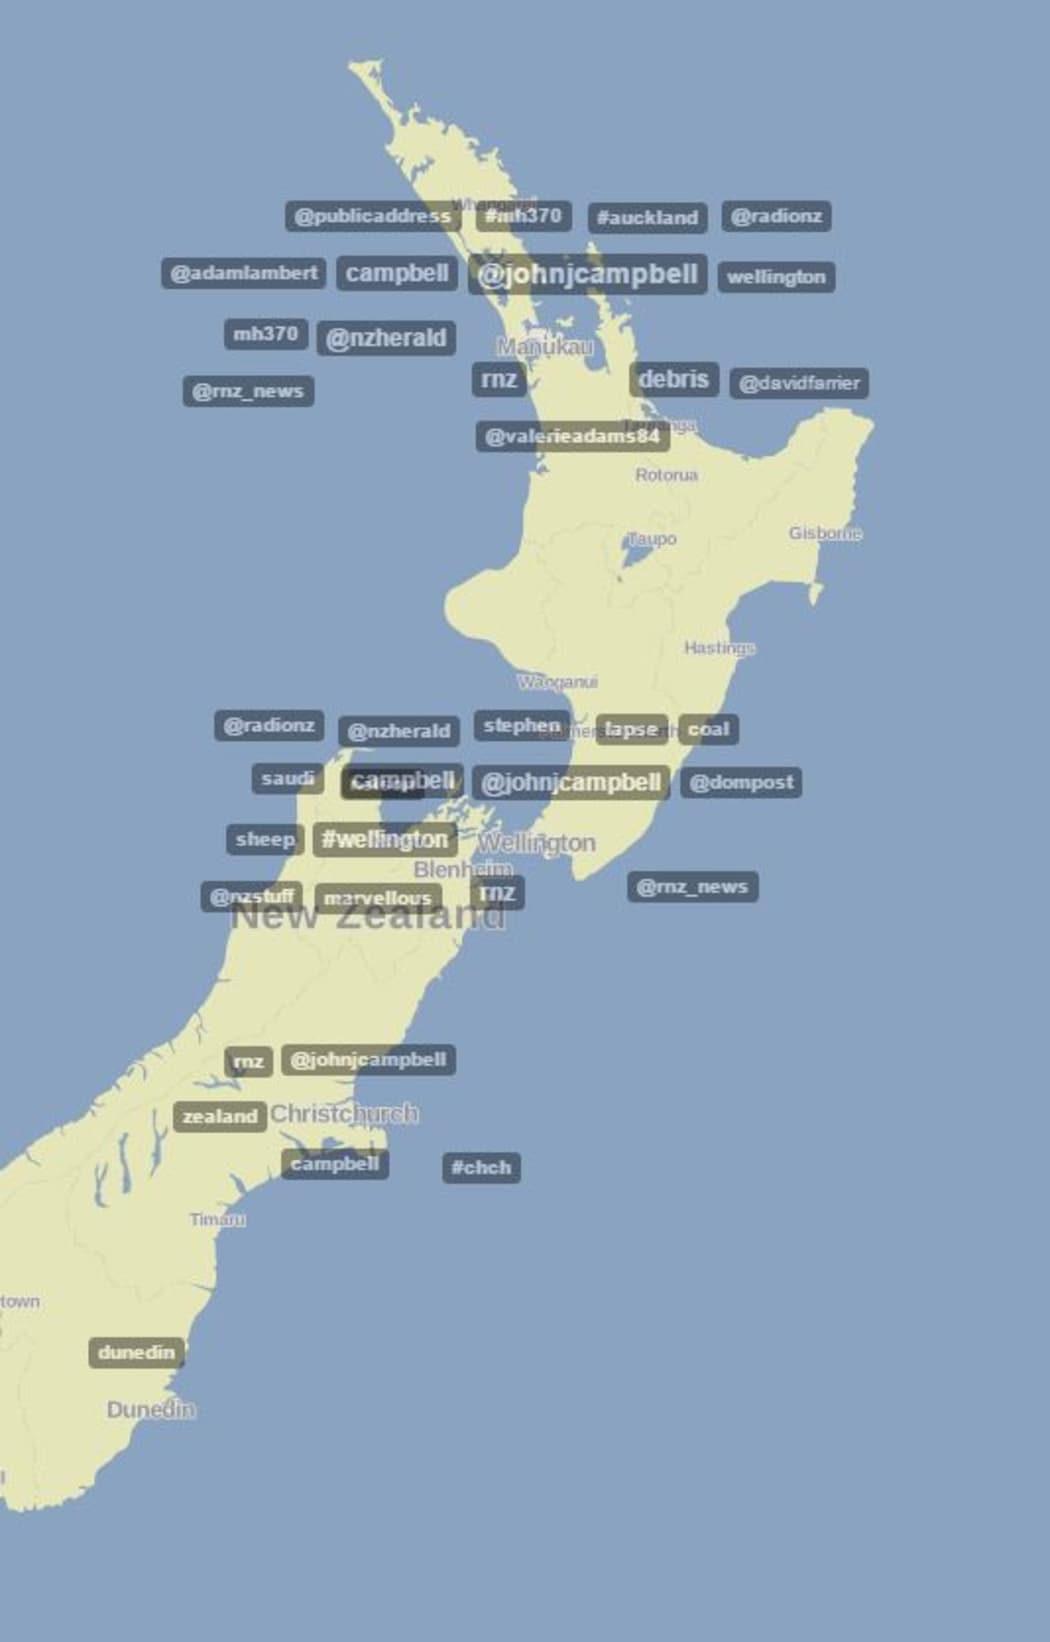 a graphic showing a map of New Zealand and what was trending on twitter, including John Campbell, RNZ, RNZ News and RadioNZ